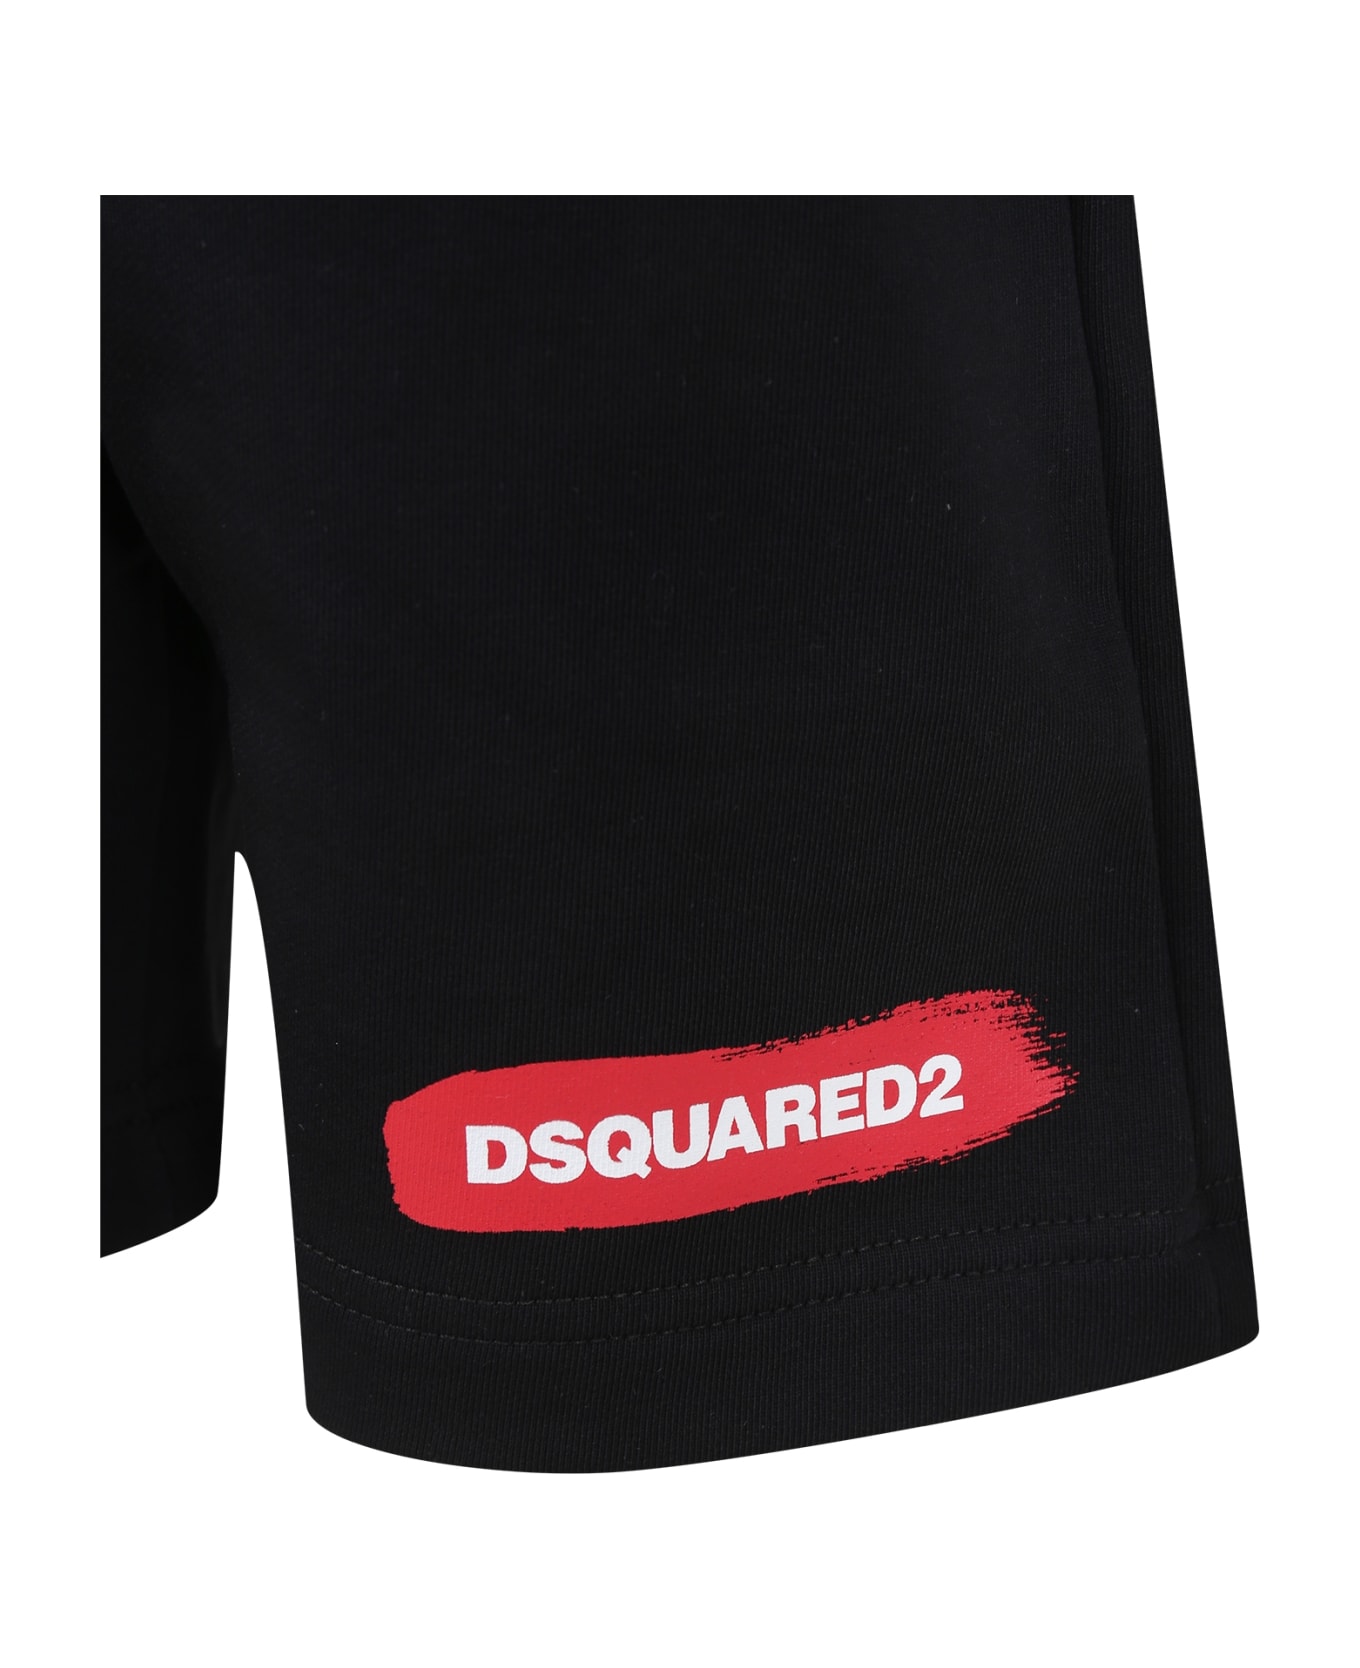 Dsquared2 Black Shorts For Boy With Logo - Black